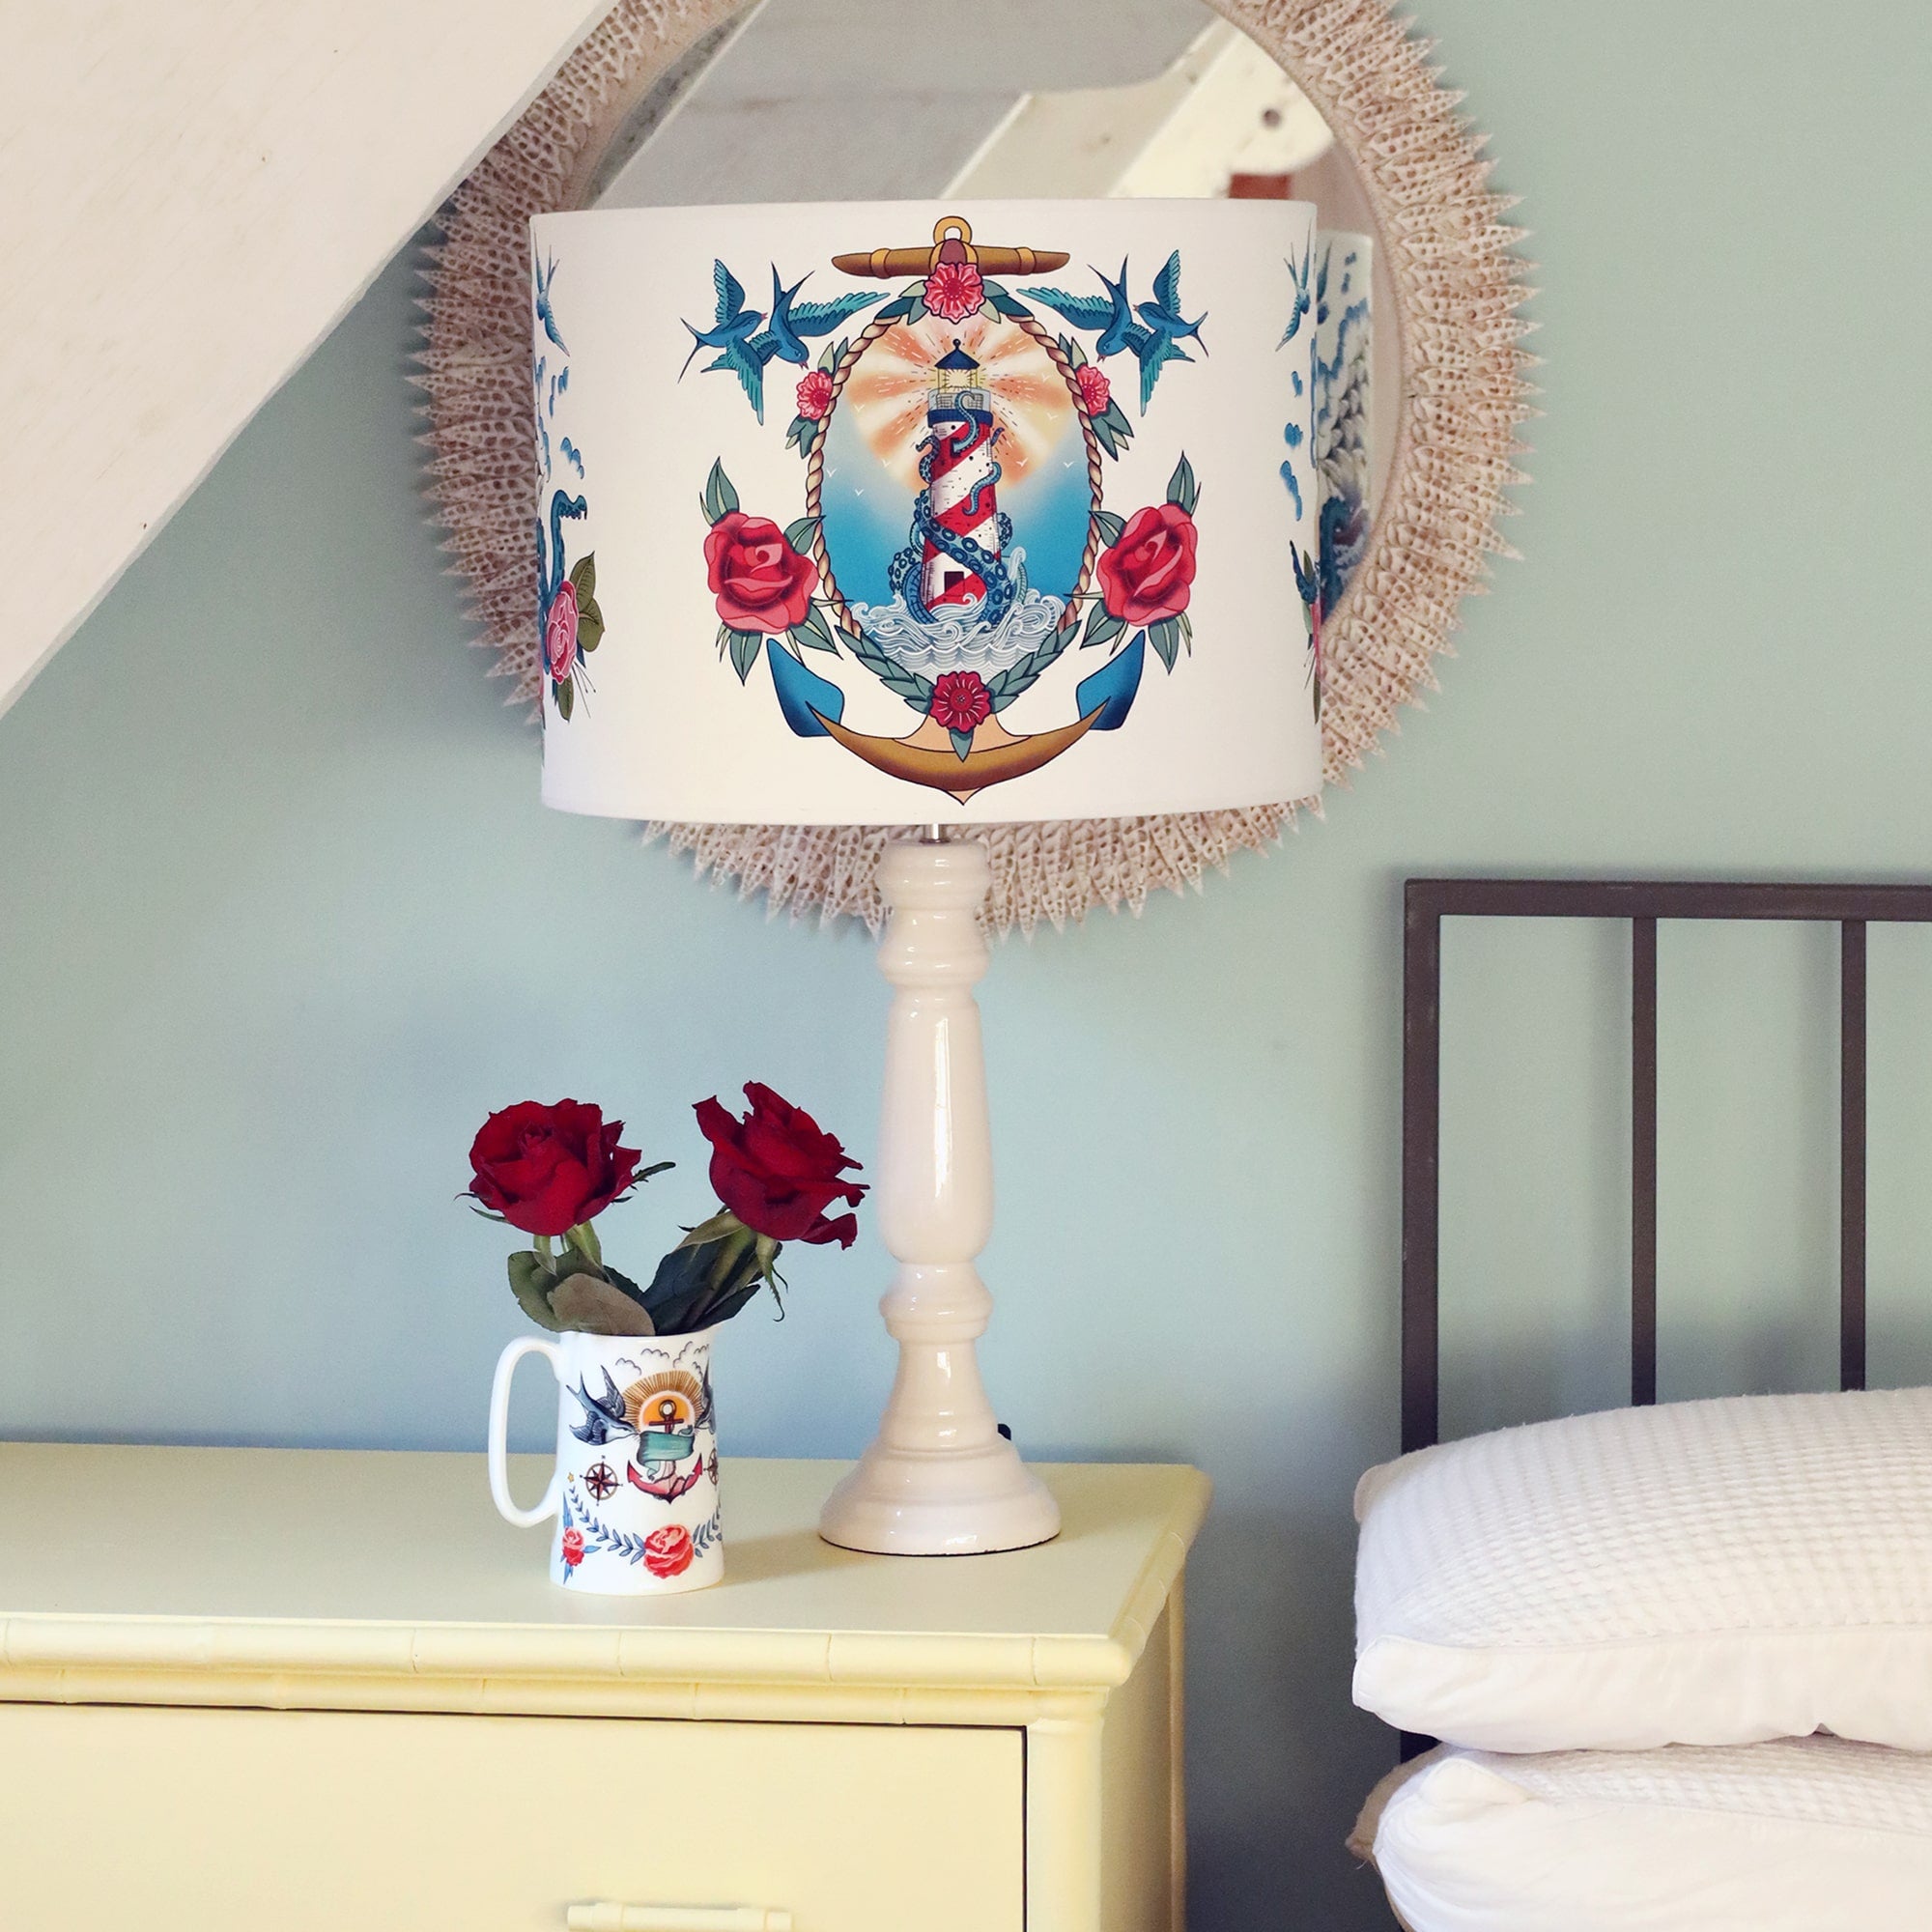 White bone china jug with brightly coloured tattoo inspired design of swallows, anchor and roses with red roses in it. This is sitting on a soft yellow set of drawers next to a bed. There is also a white lamp base with a tattoo inspired lampshade with a lighthouse, kraken, rope, anchor and roses.